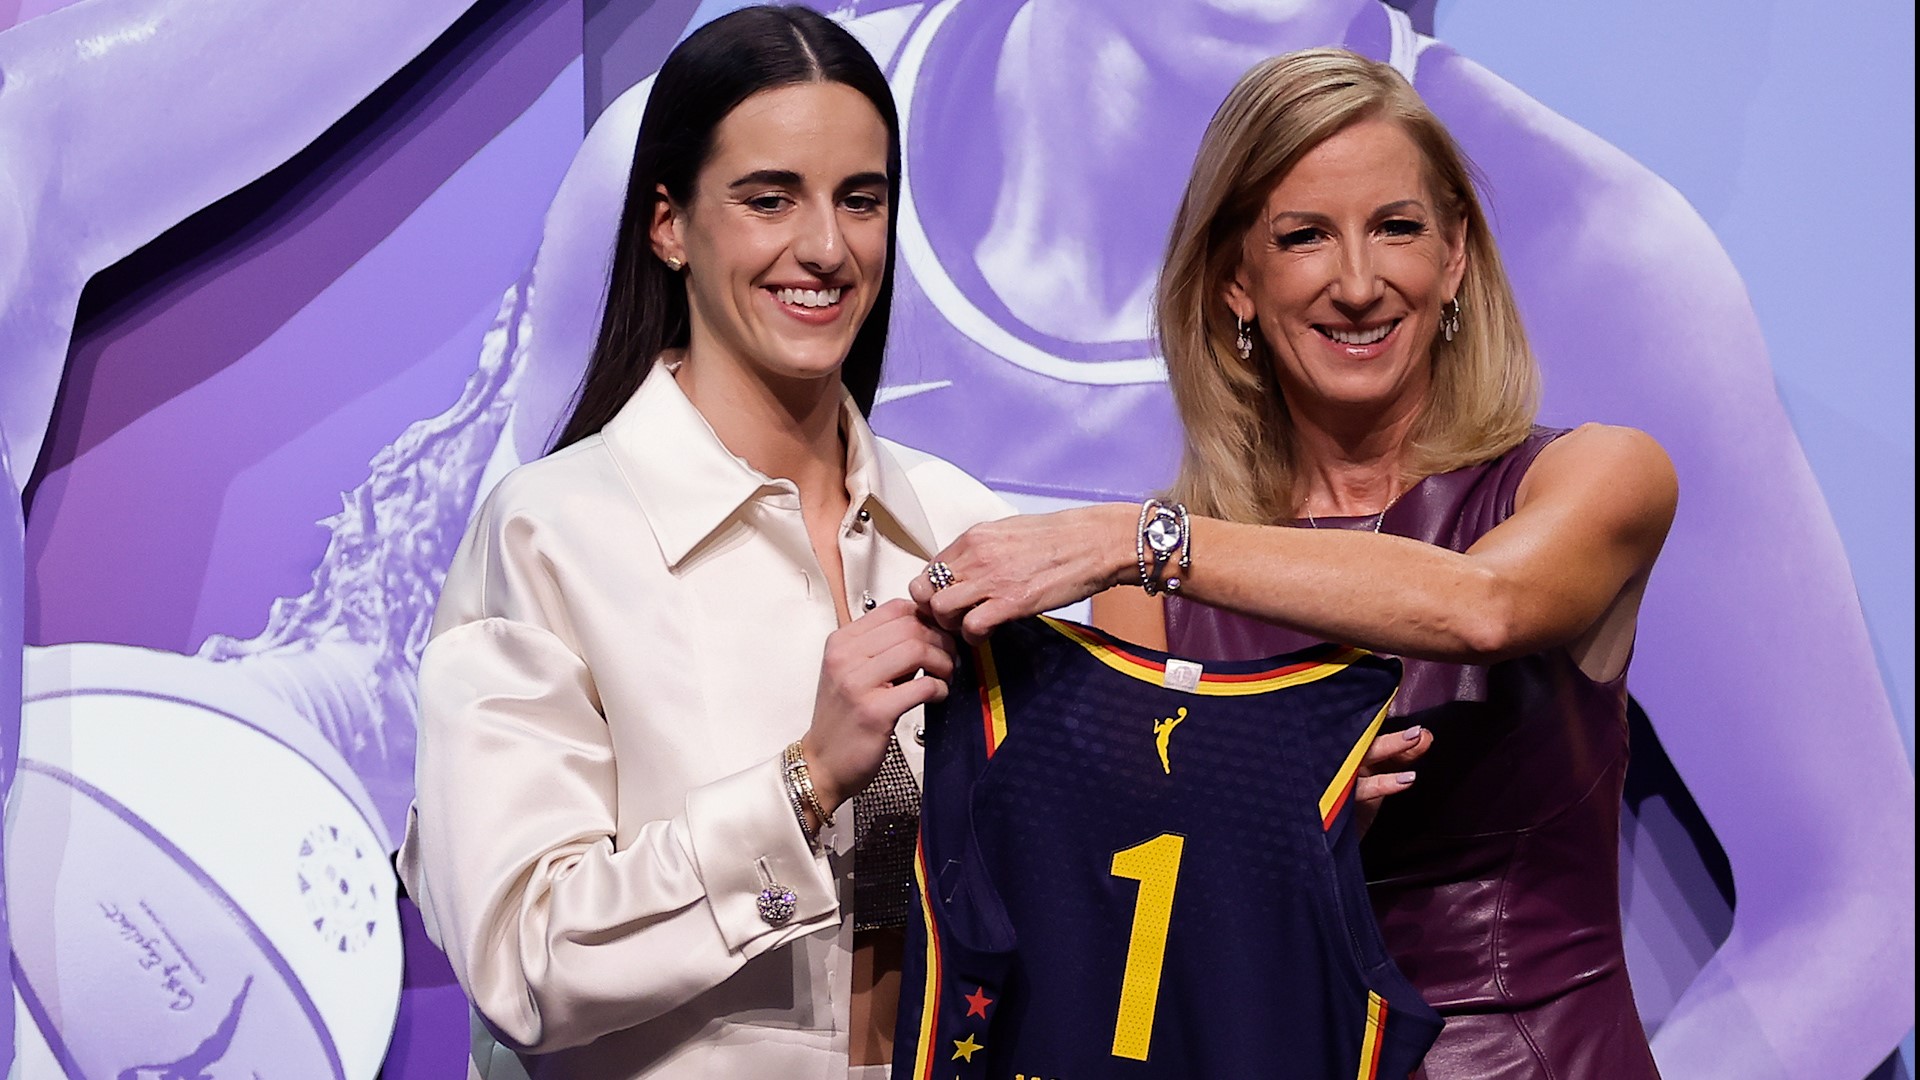 Caitlin Clark is expected to make her WNBA debut when the Indiana Fever visit the Dallas Wings on Friday, May 3 for the preseason opener.